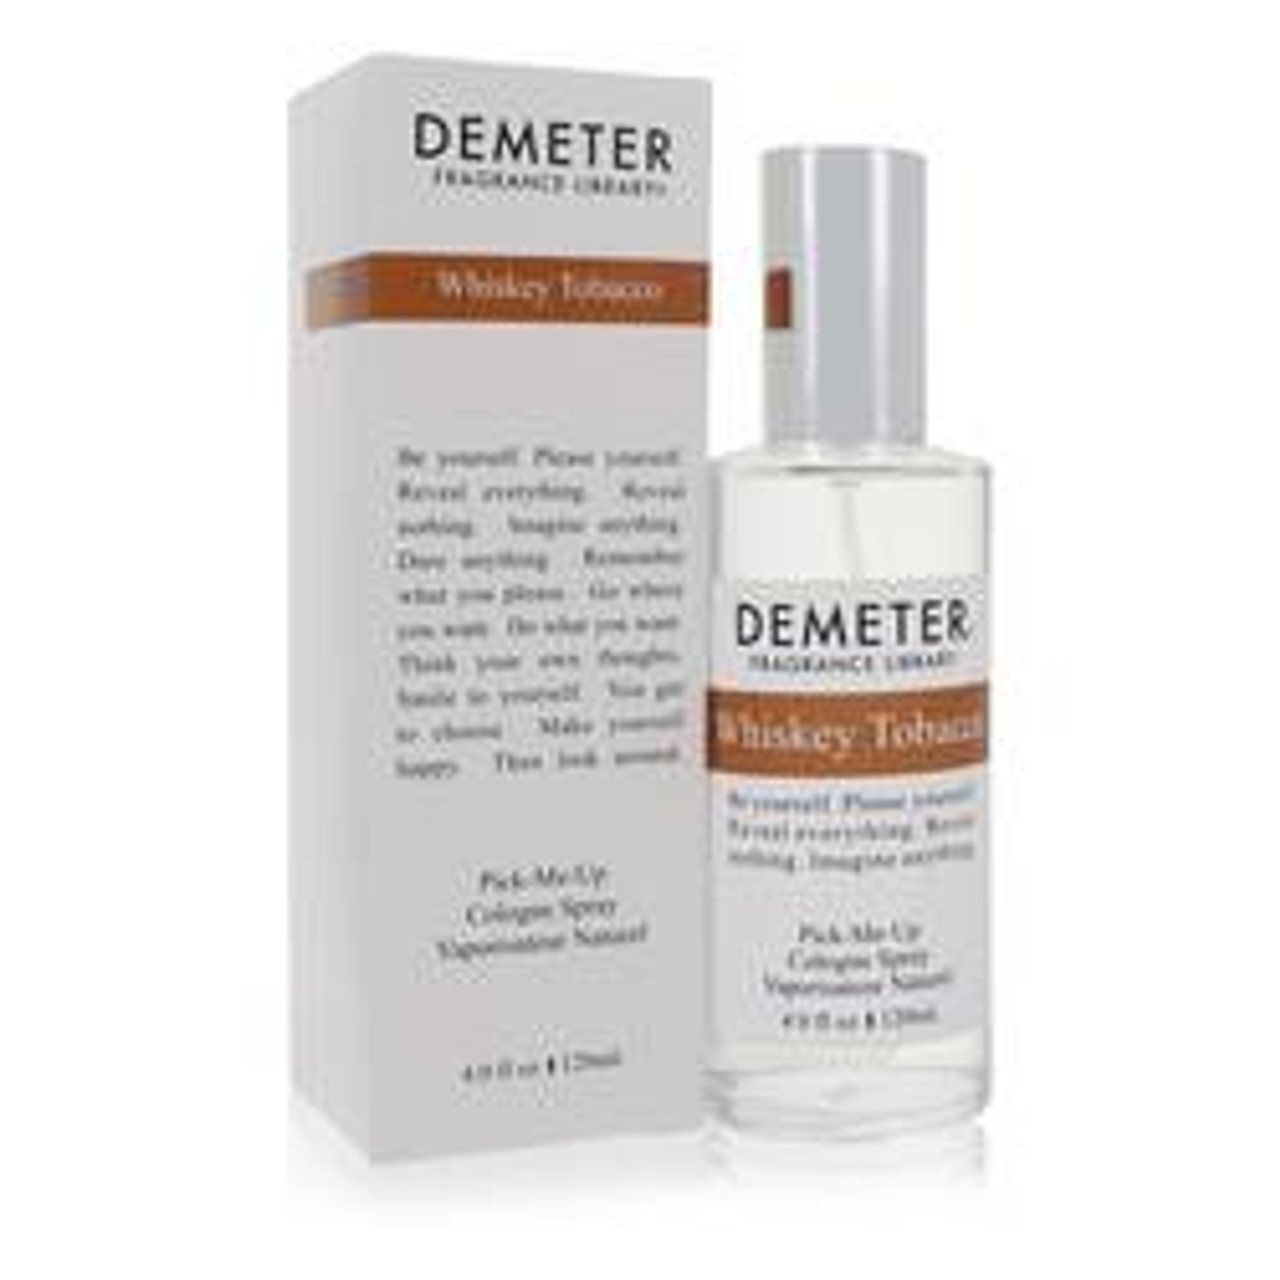 Demeter Whiskey Tobacco Cologne By Demeter Cologne Spray 4 oz for Men - [From 79.50 - Choose pk Qty ] - *Ships from Miami